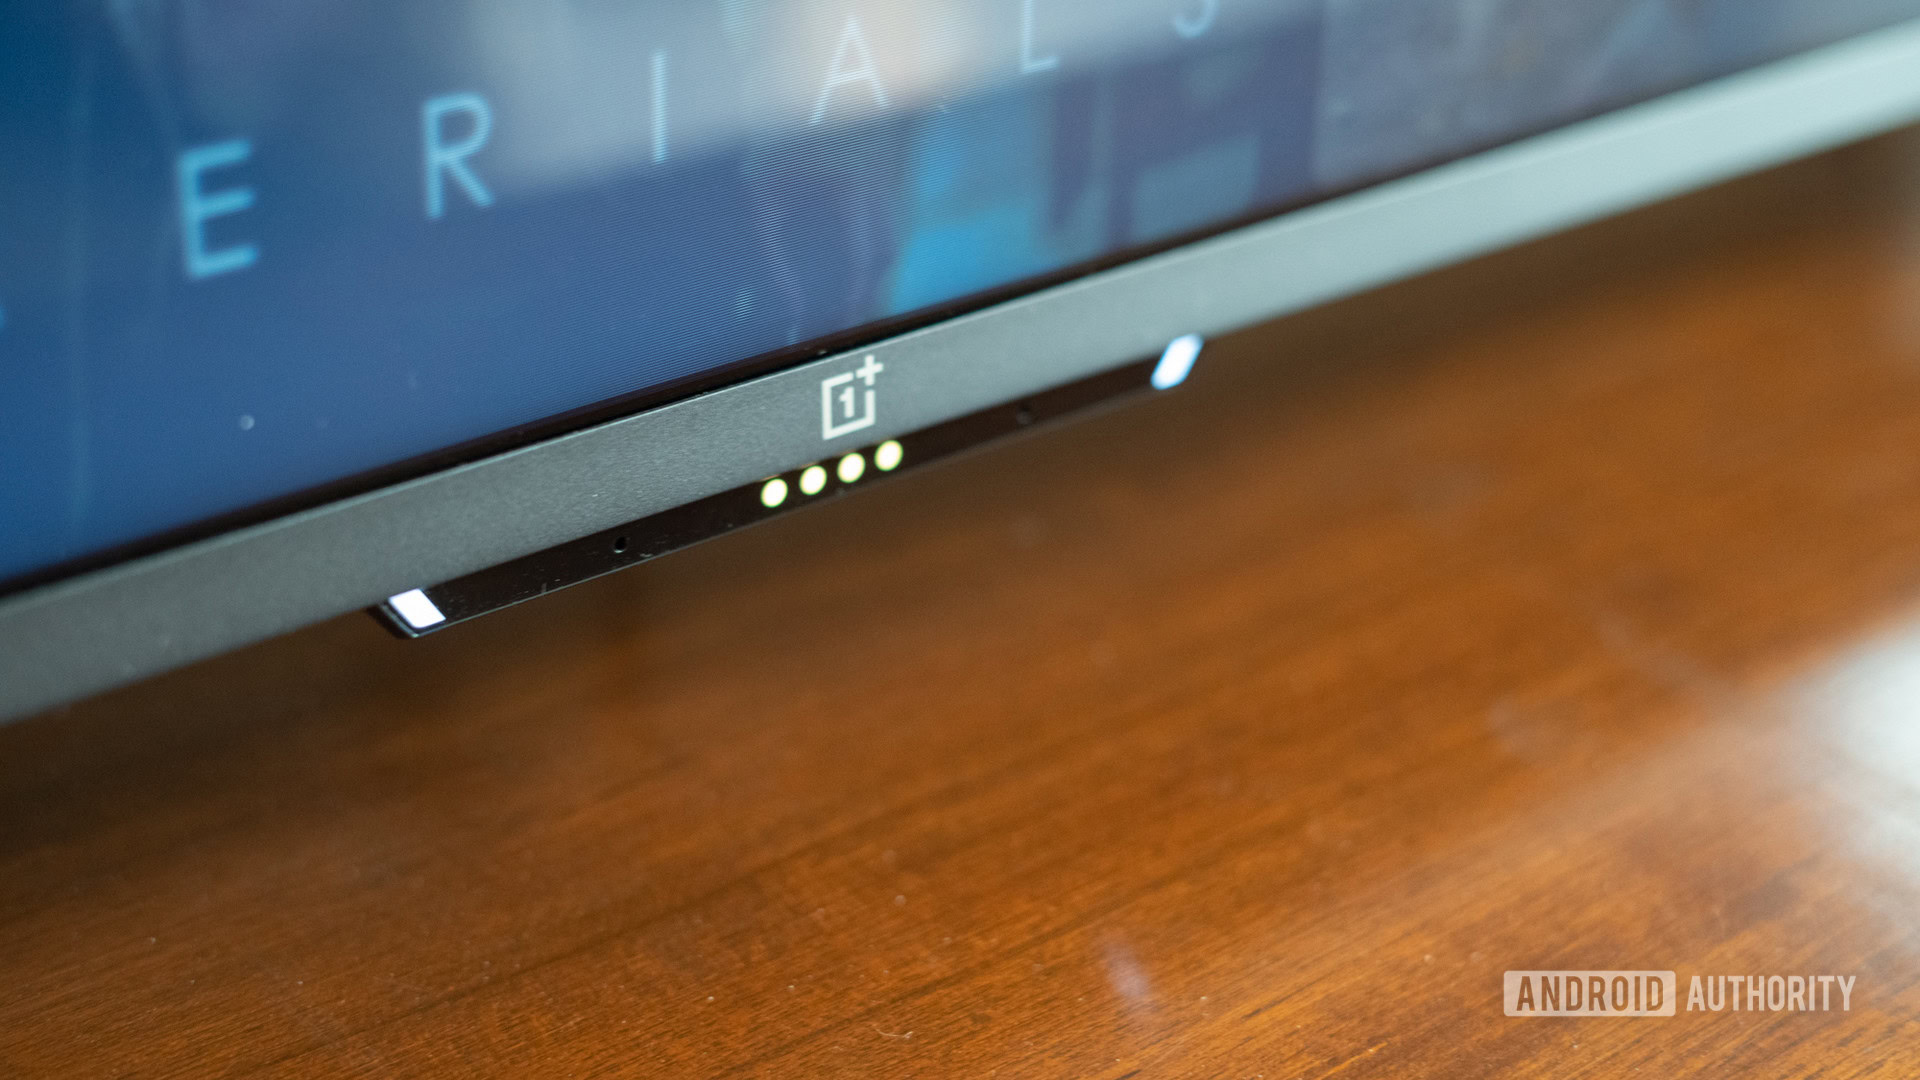 The OnePlus TV U1S showing the front module with lights and logo.